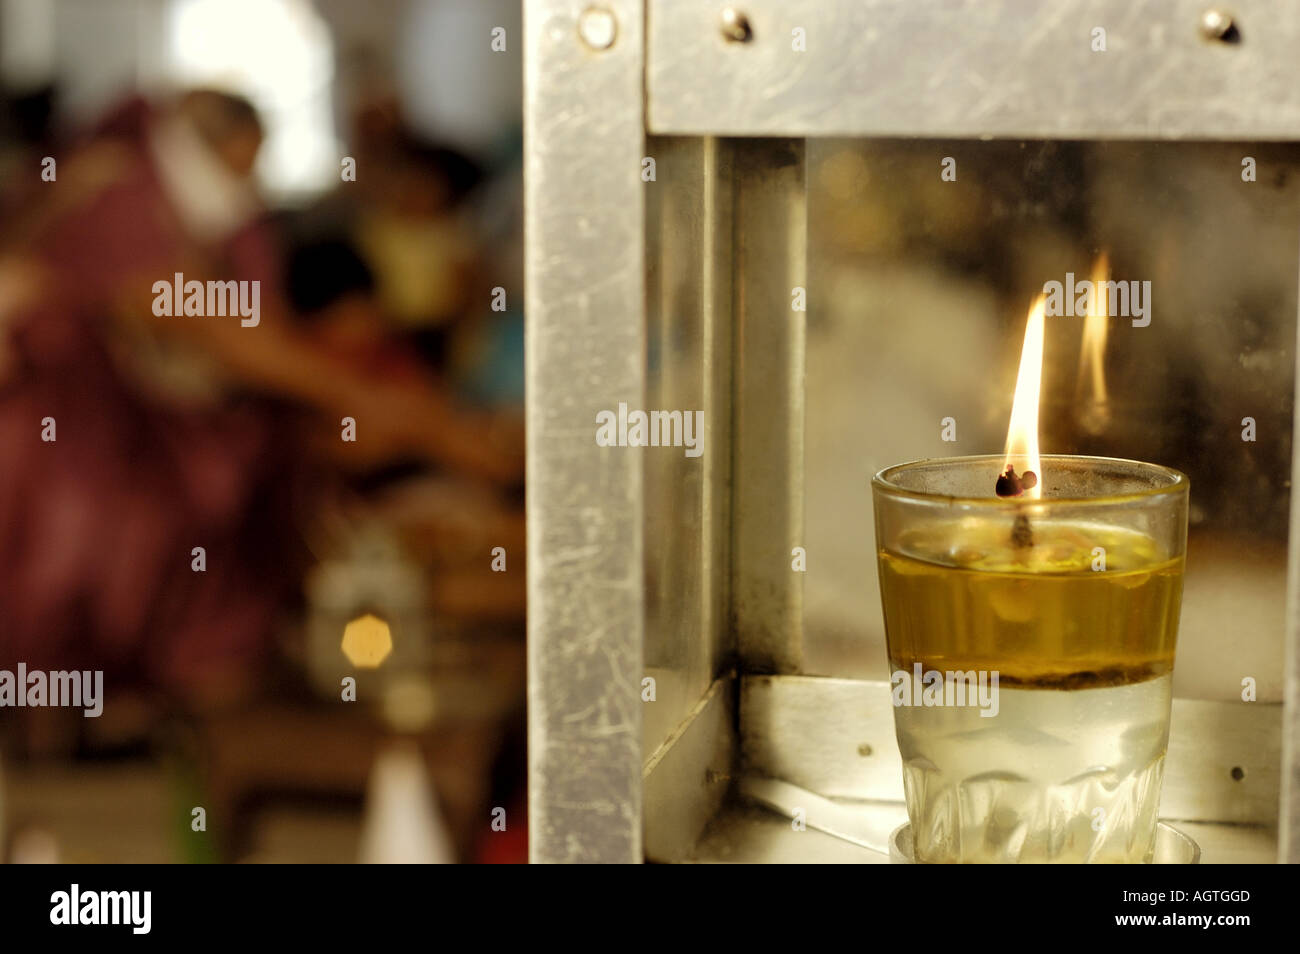 HMA79958 Oil Lamp Diya on special prayer being offered by Jain religious community in India Stock Photo